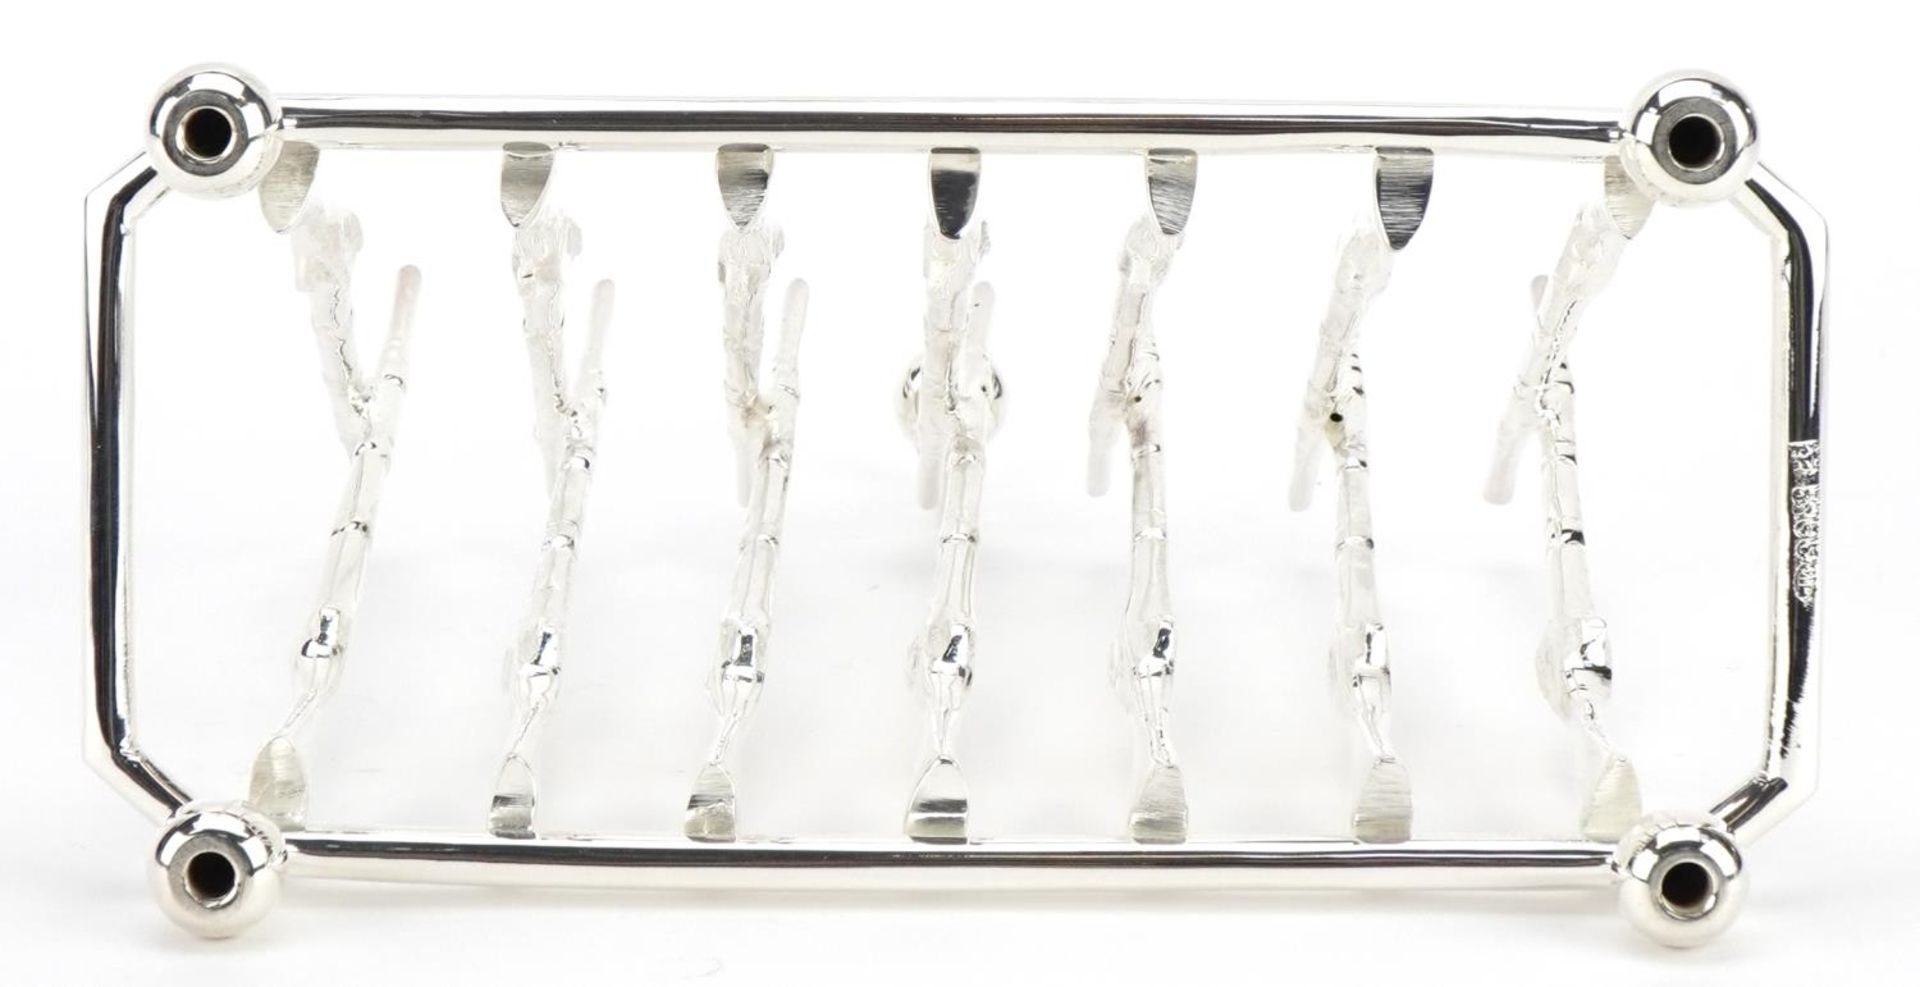 Rifle design silver plated six slice toast rack, 19.5cm wide - Image 3 of 4